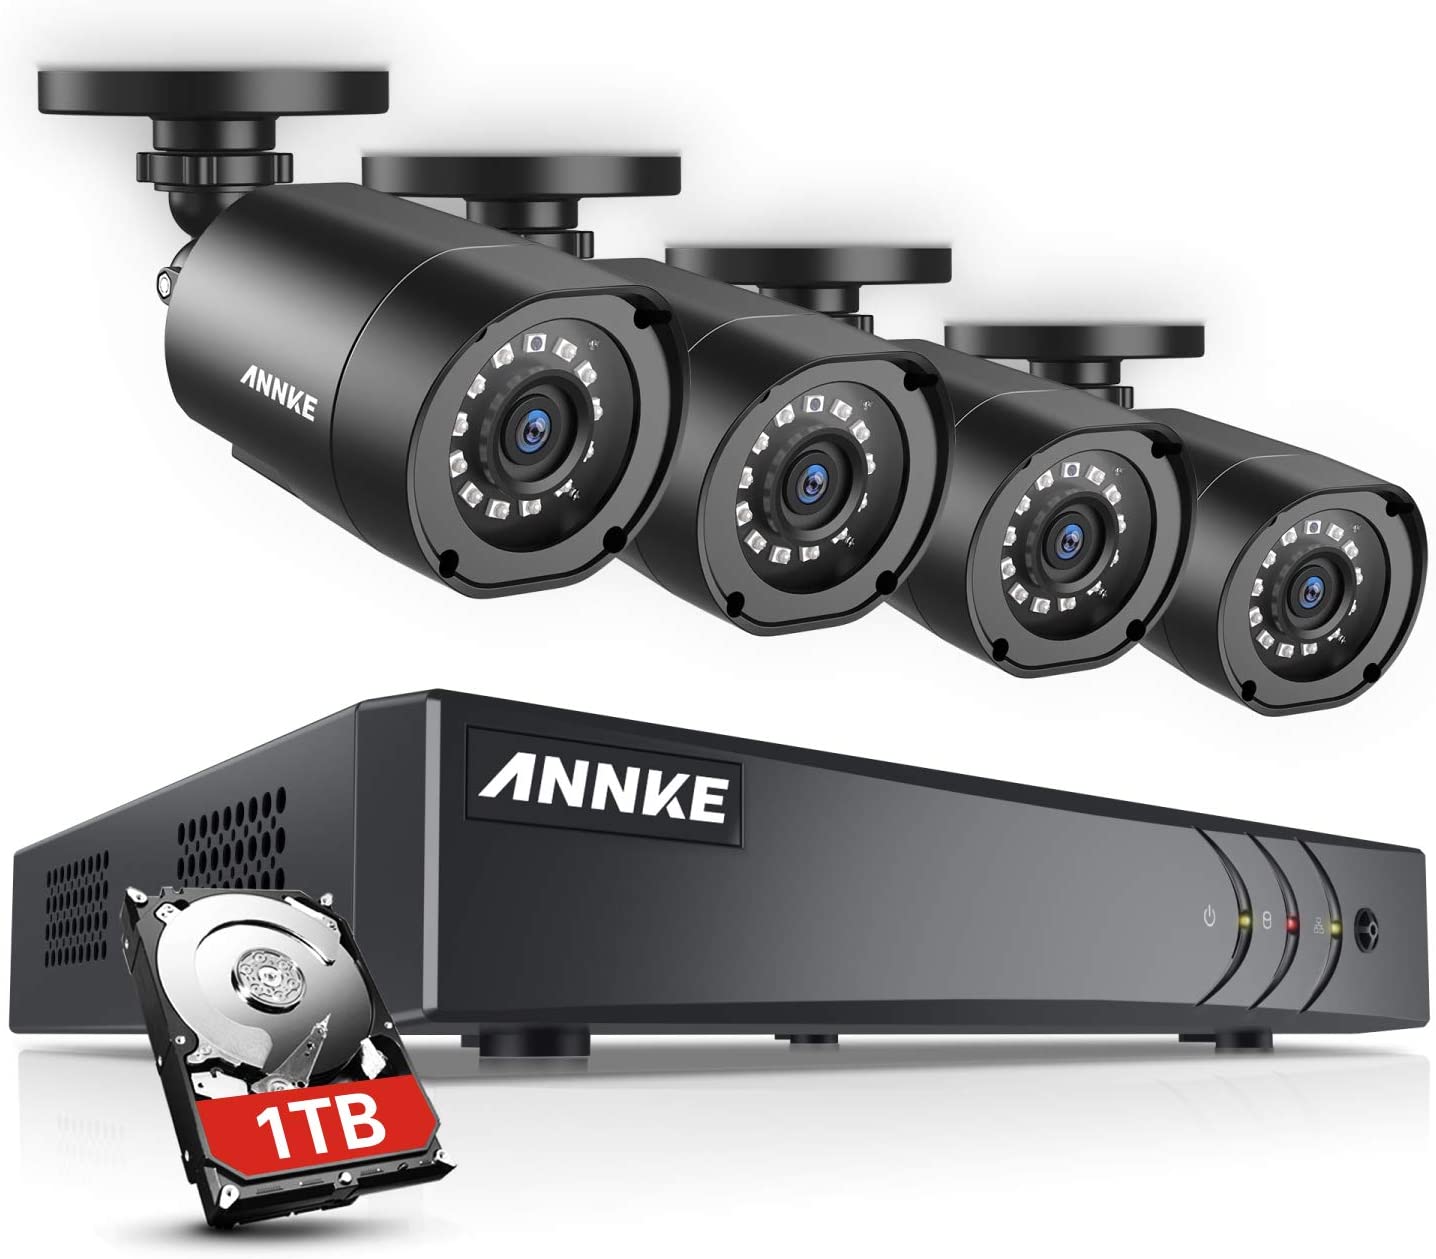 ANNKE 8Channel Security Camera System 1080P Lite H.264+ DVR with 1TB Surveillance HDD and (4) 720P Weatherproof Cameras with Build-in IR-cut filter, Smart Playback, Instant email alert with images